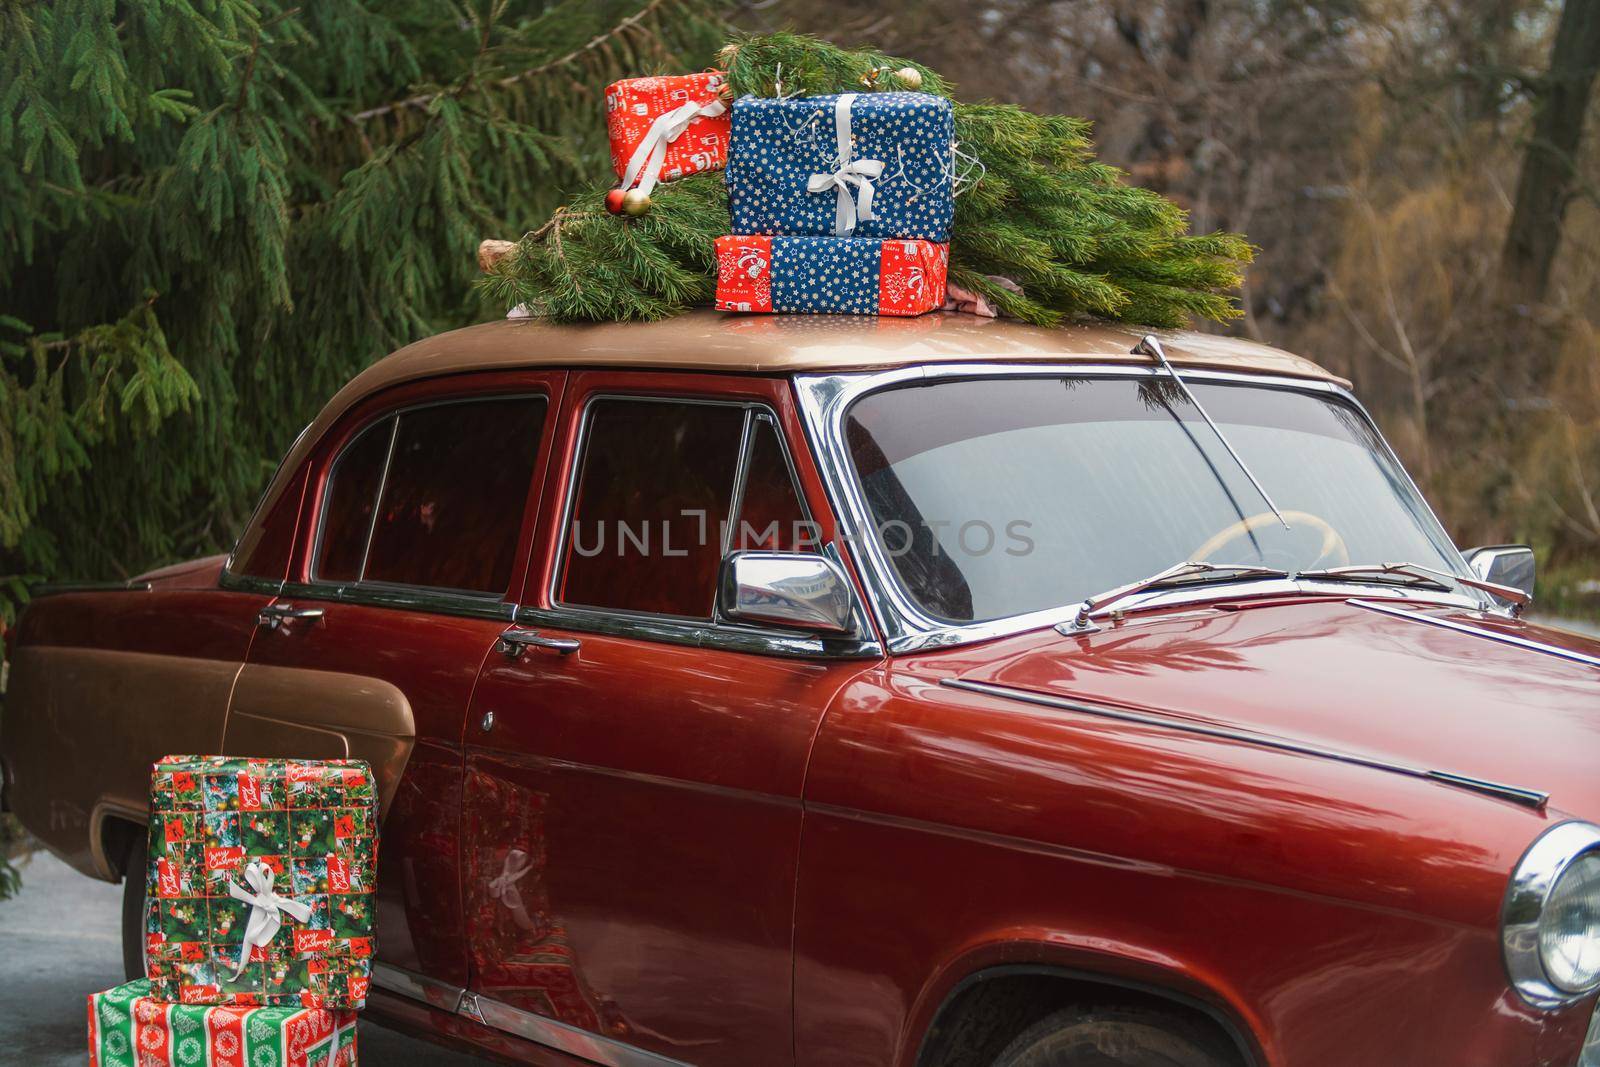 retro car with gifts for the new year